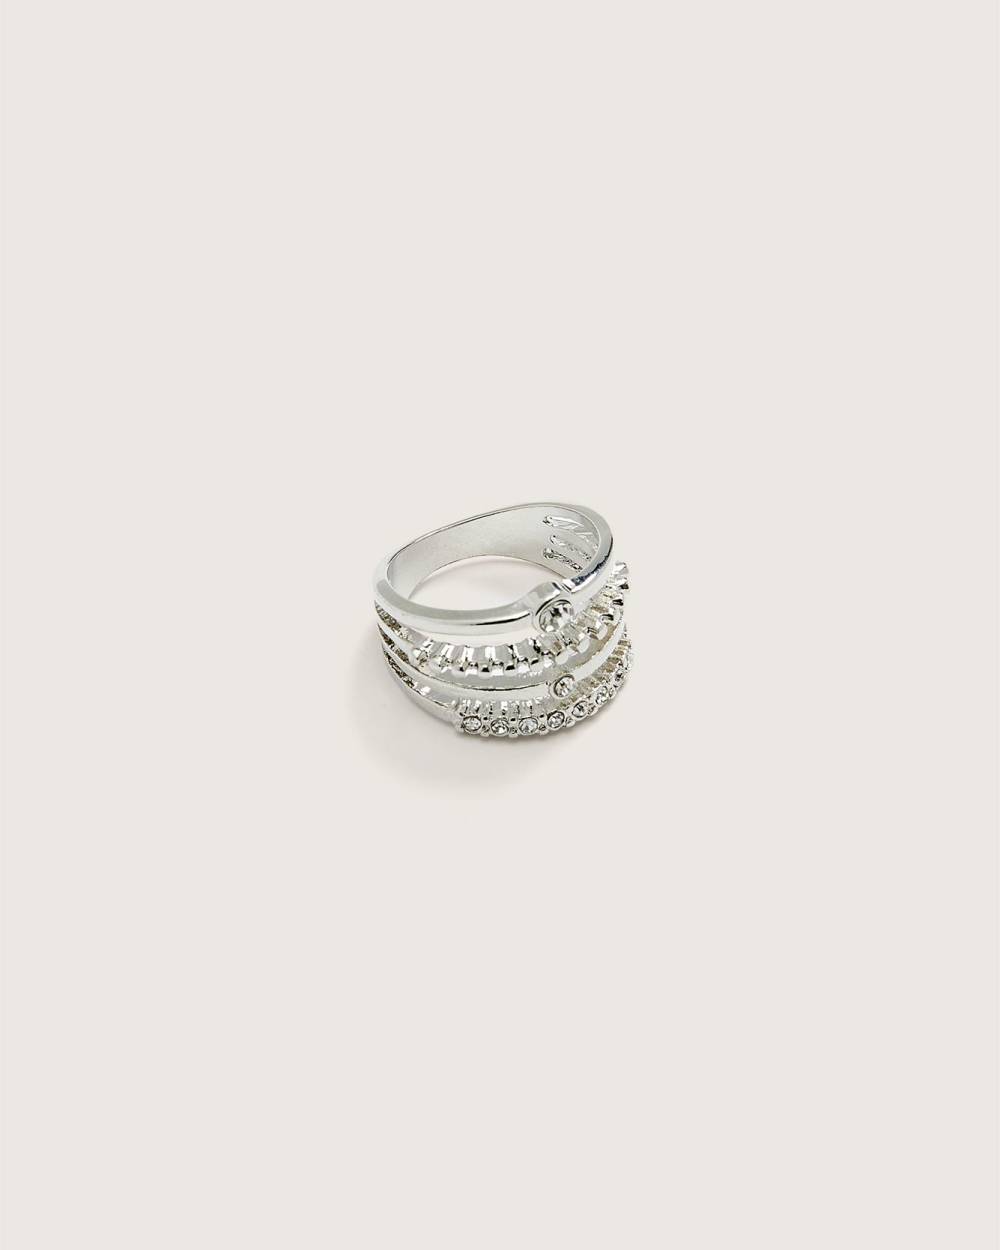 4-Layer Ring with Crystal Stones | Penningtons